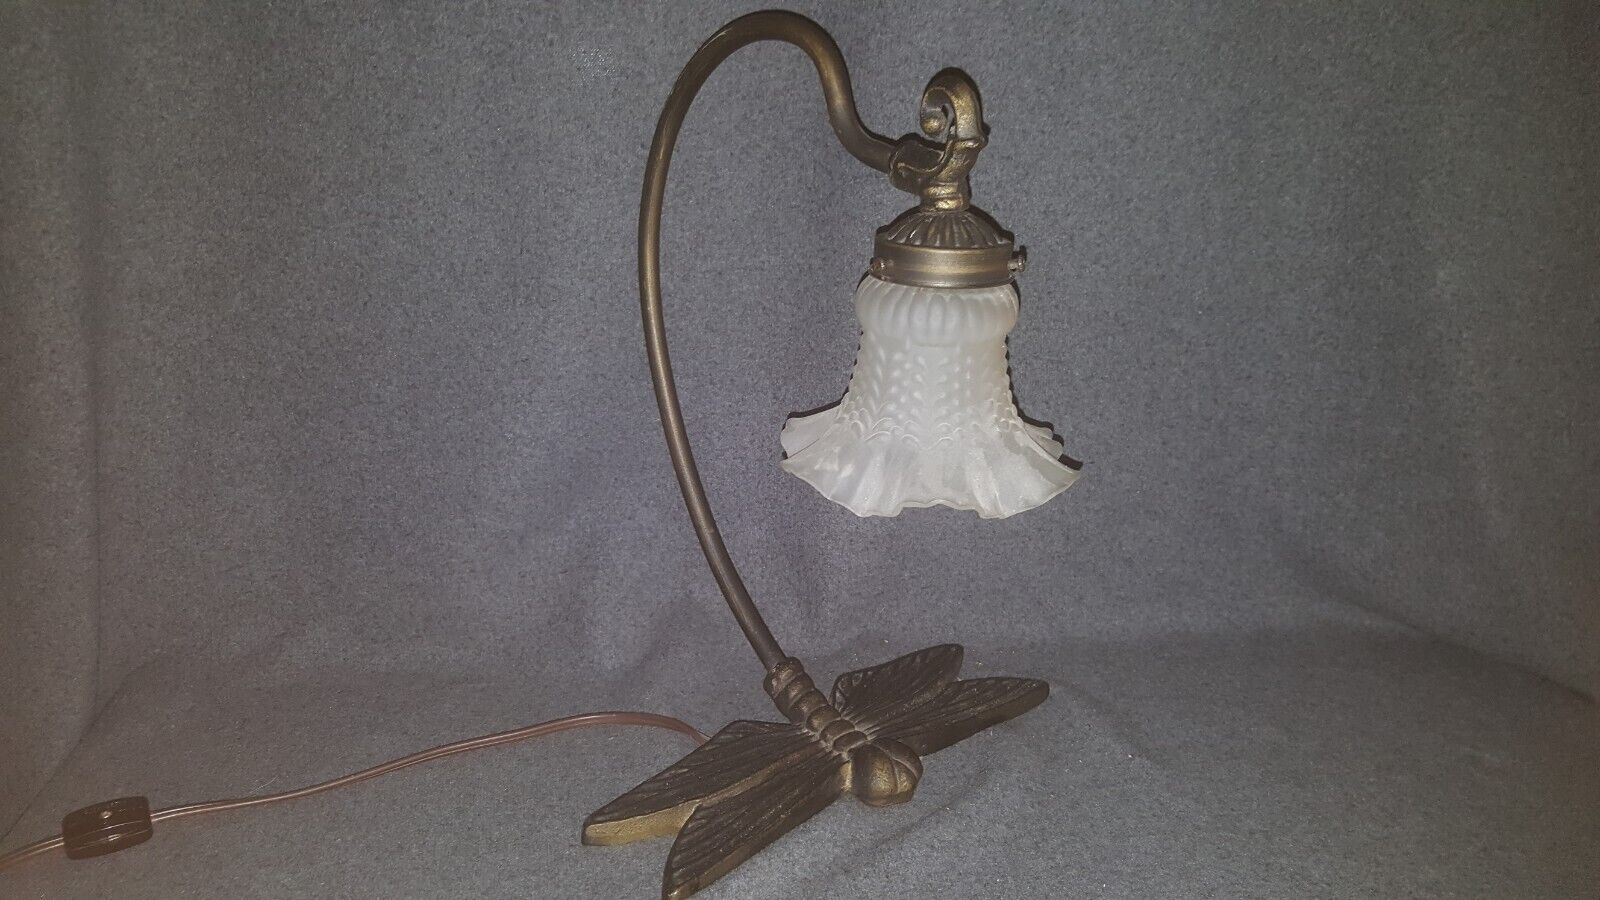 Vintage Dragonfly Gooseneck Lamp With Frosted Glass Shade